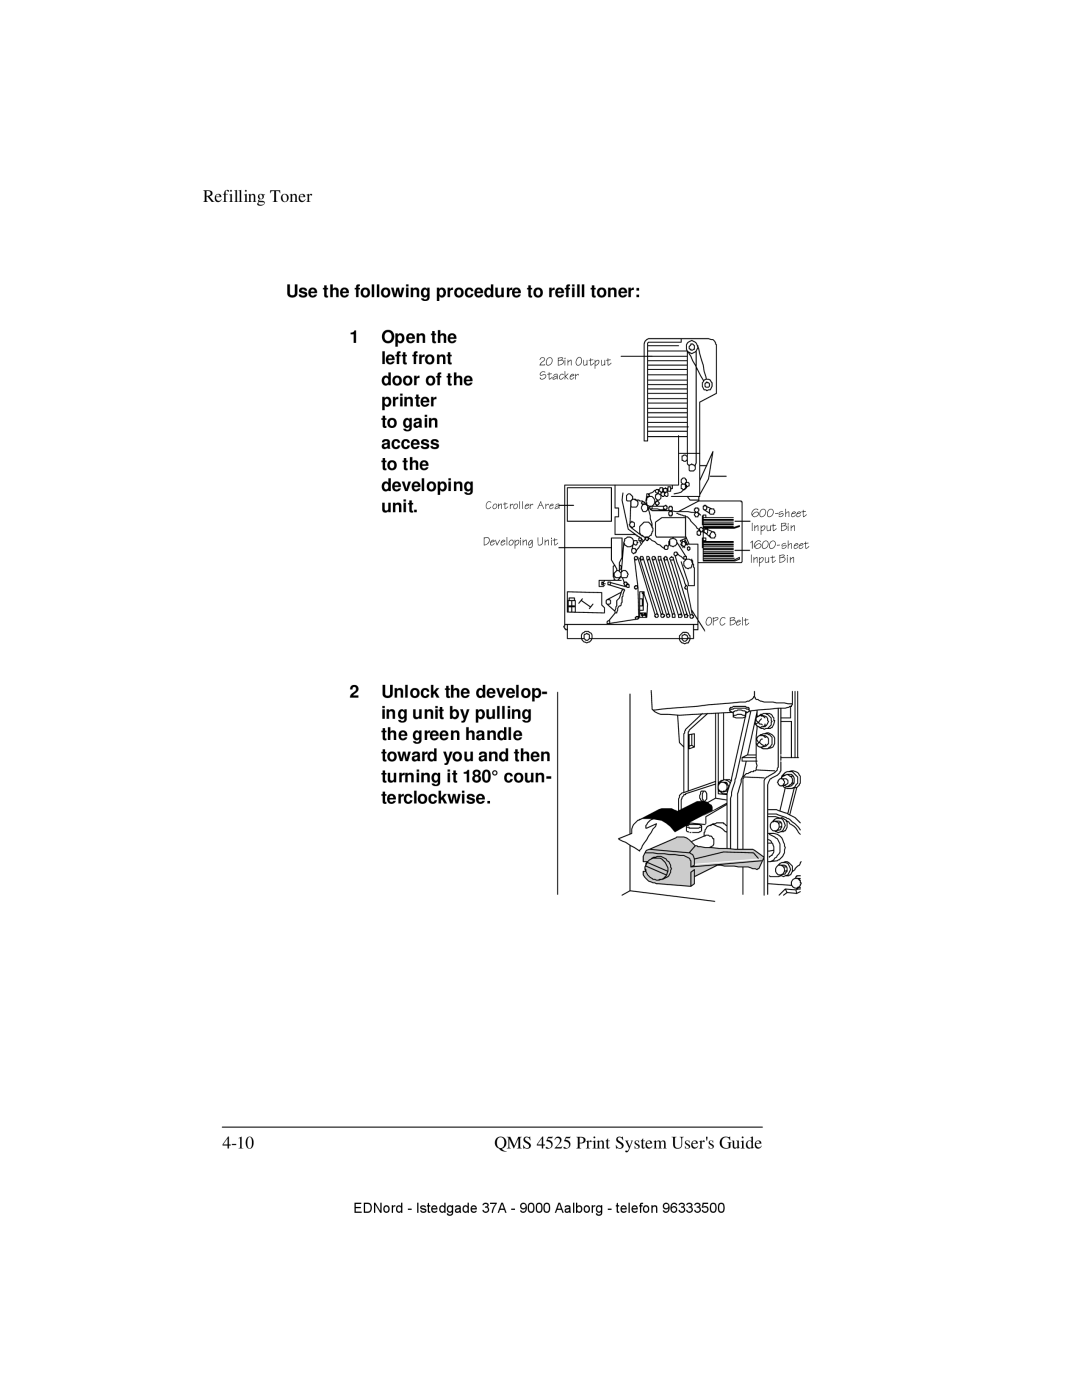 IBM QMS 4525 manual Use the following procedure to refill toner 